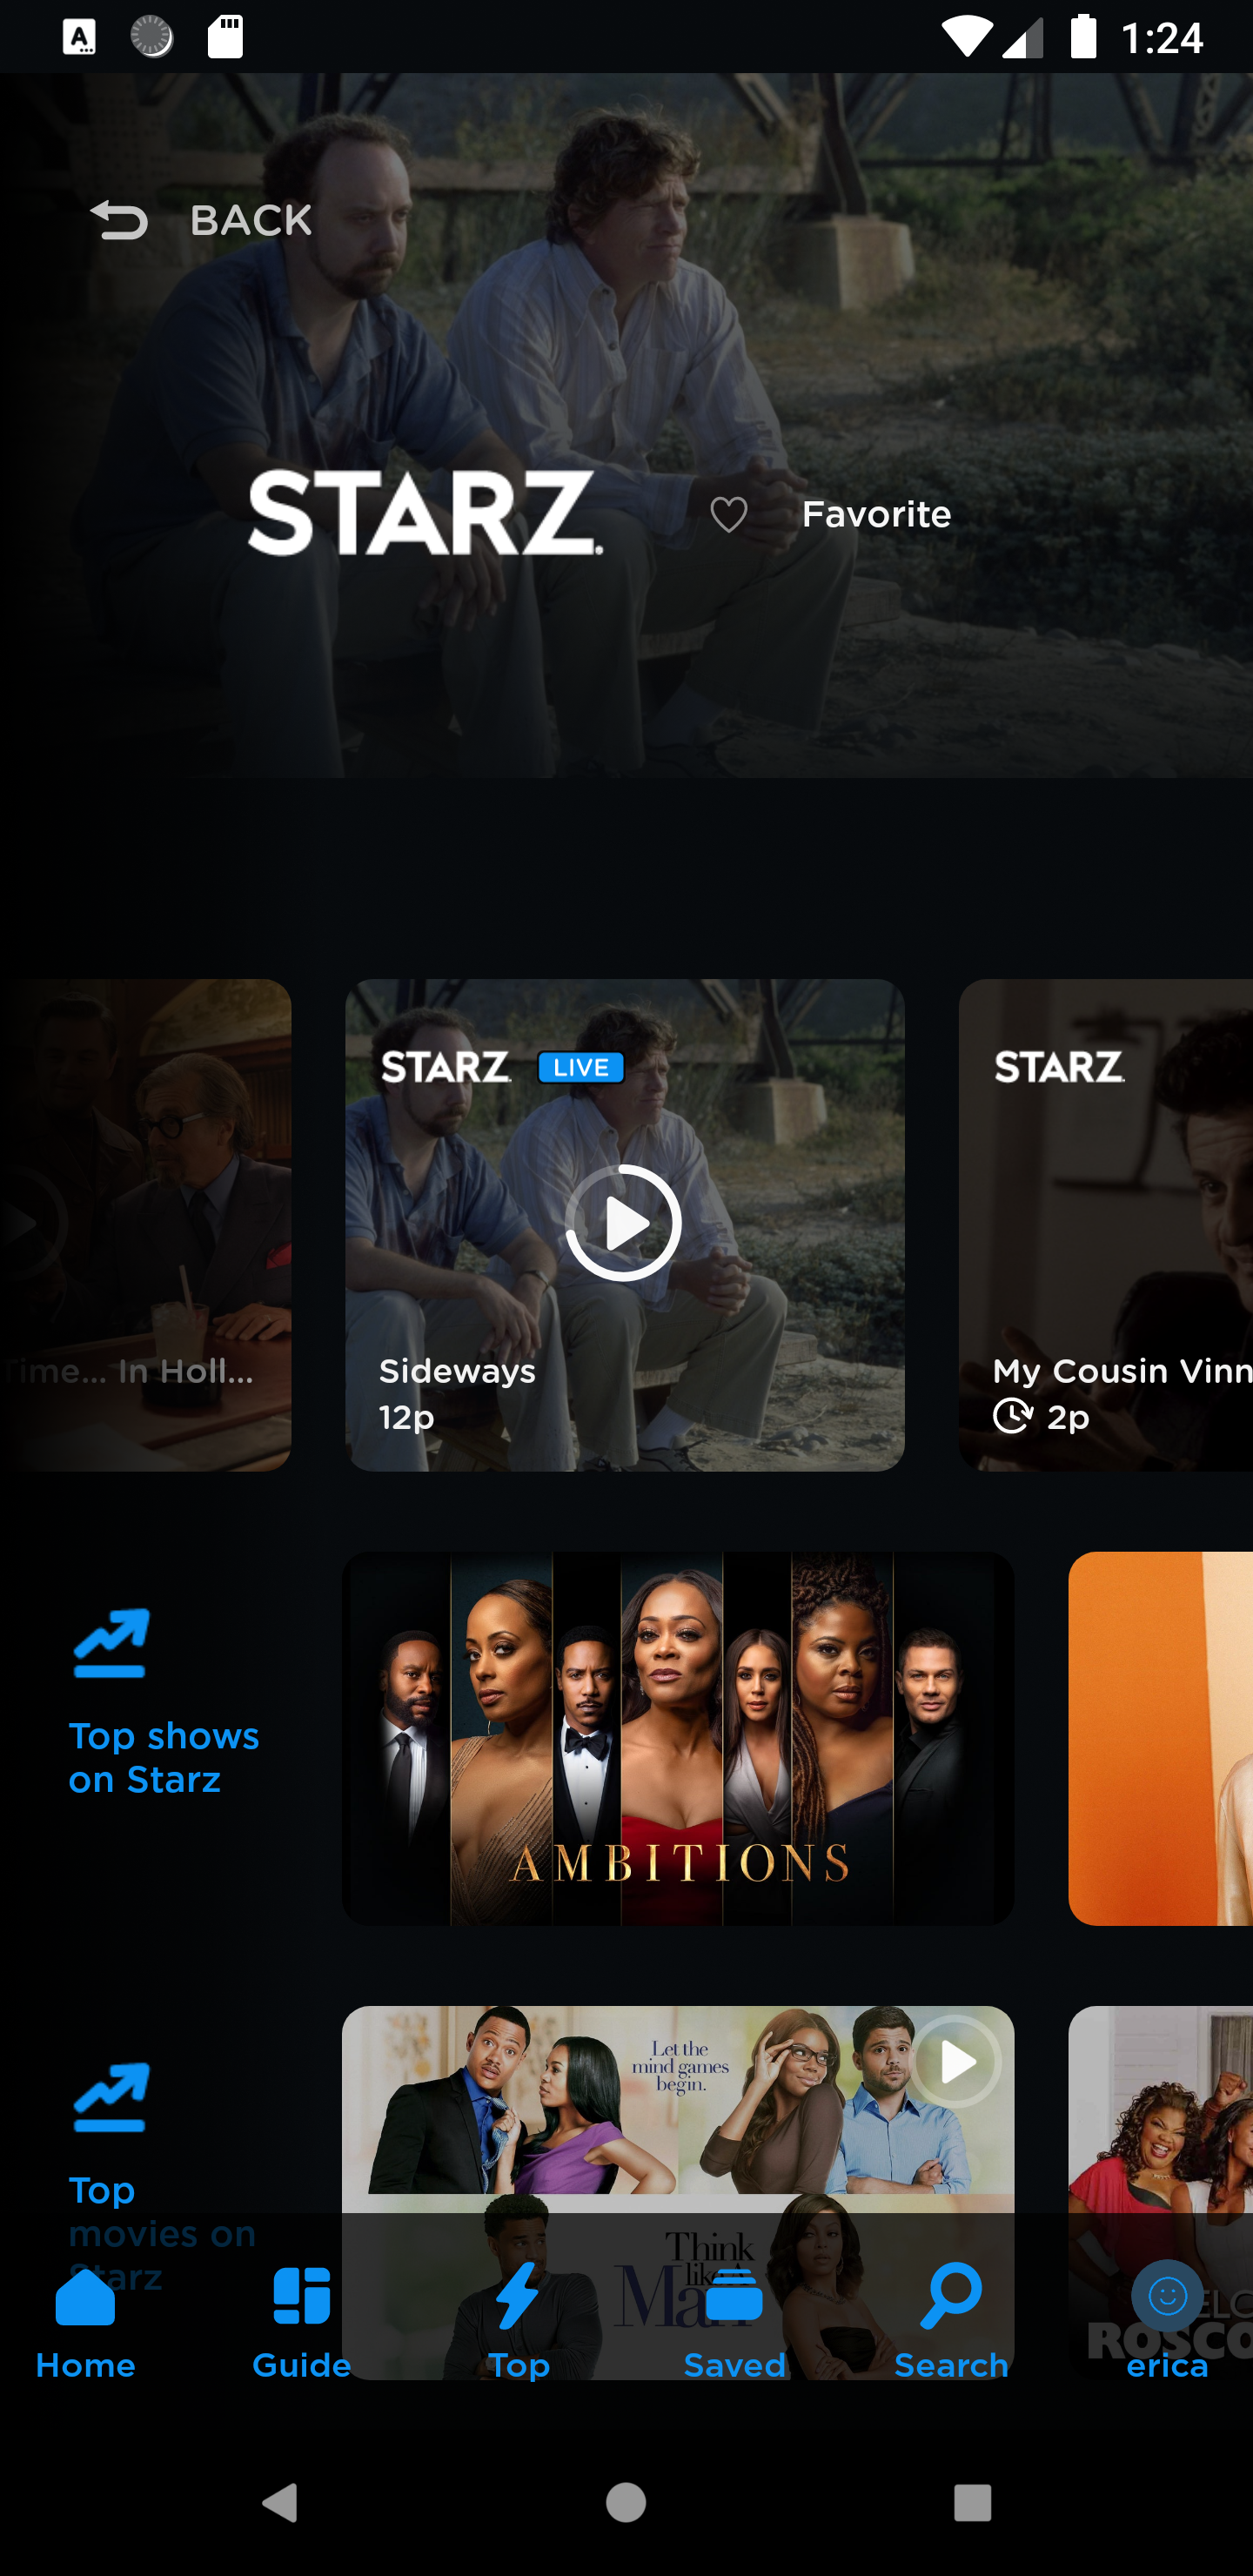 'Screenshot of STARZ Channel Profile on Android Mobile'